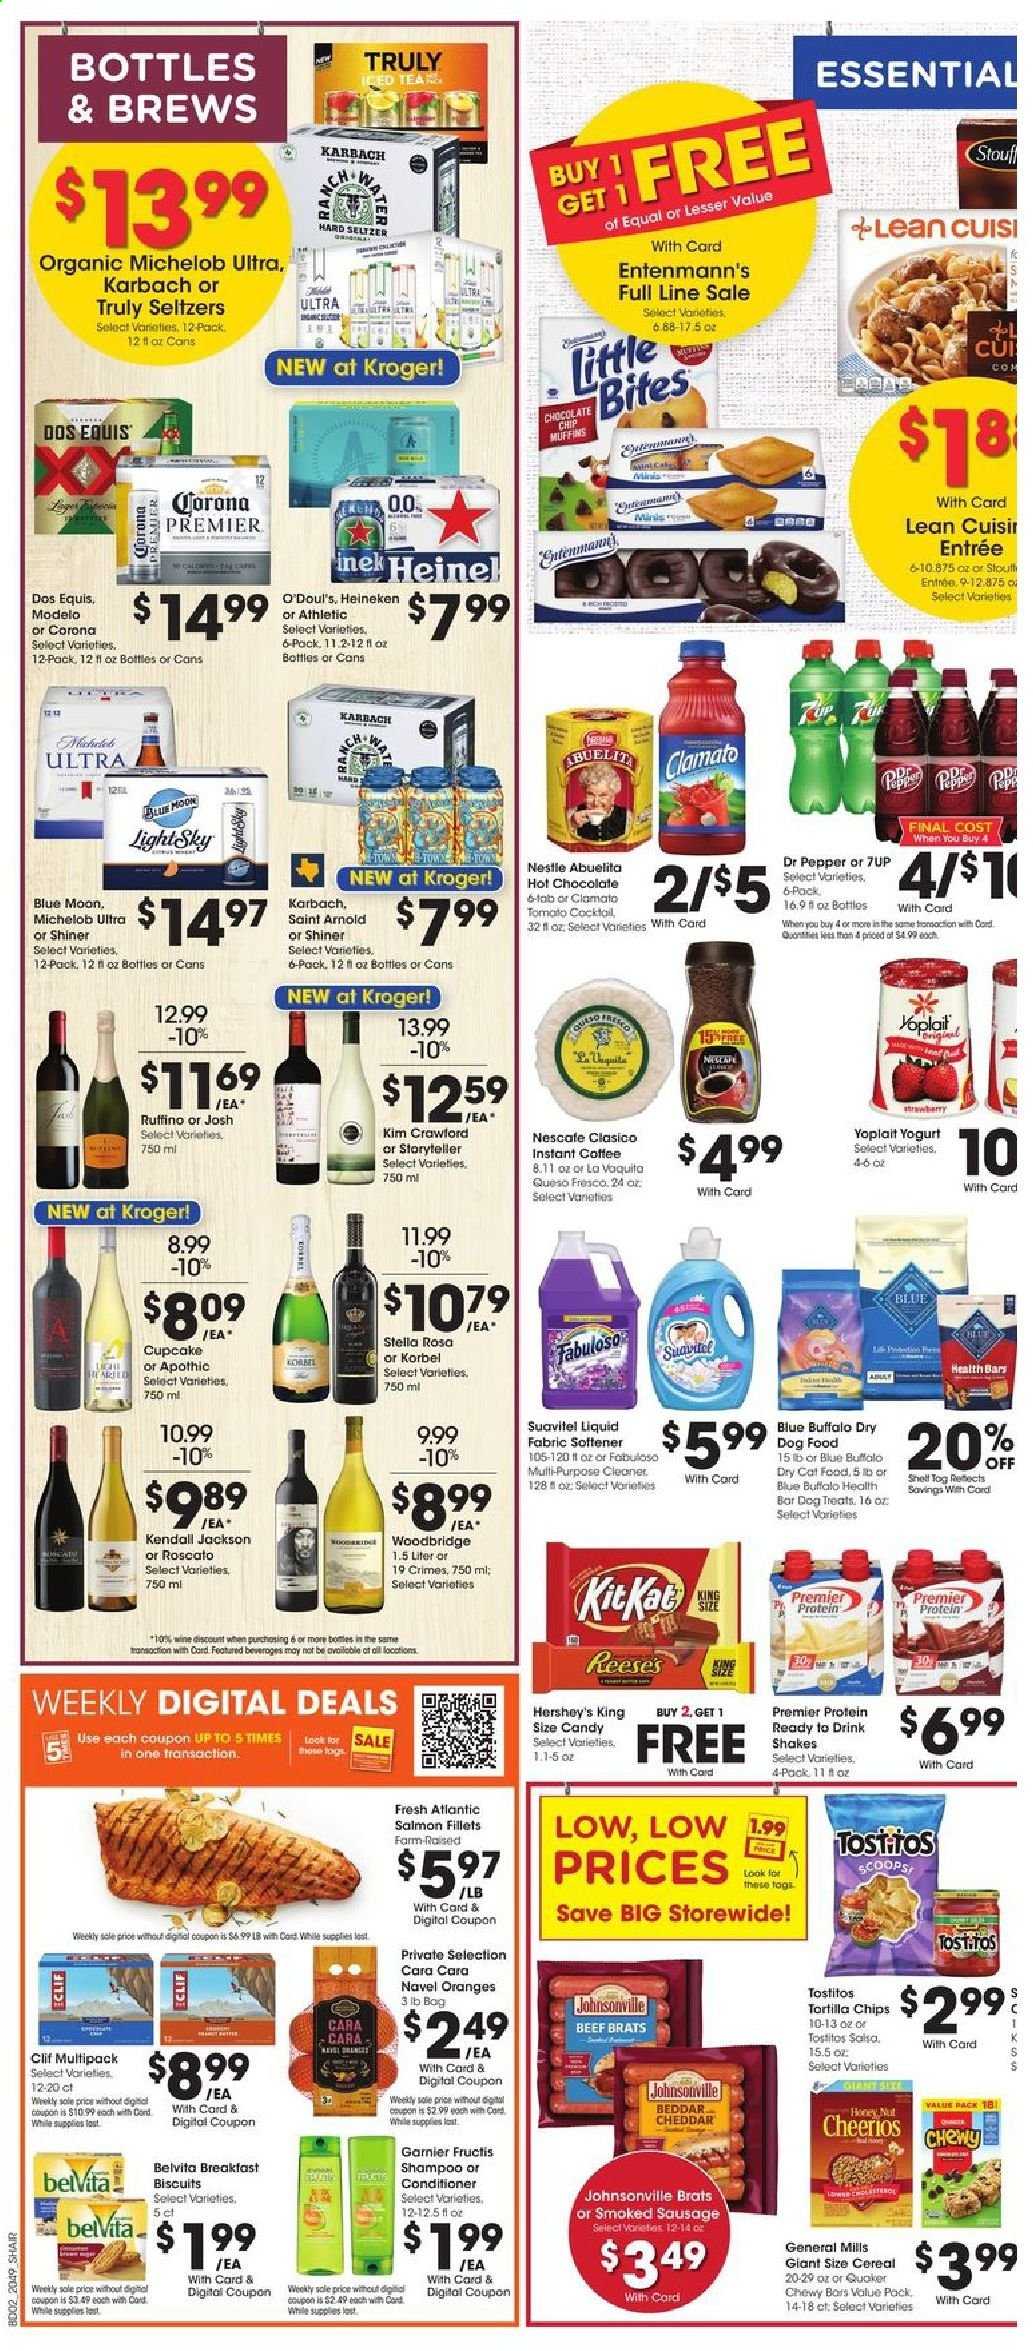 thumbnail - Kroger Flyer - 01/06/2021 - 01/12/2021 - Sales products - Johnsonville, cupcake, muffin, Entenmann's, Little Bites, oranges, salmon, salmon fillet, sausage, smoked sausage, queso fresco, cheddar, yoghurt, Yoplait, shake, salsa, Reese's, Hershey's, Nestlé, chocolate, KitKat, biscuit, tortilla chips, chips, Tostitos, cereals, Cheerios, belVita, honey, Dr. Pepper, Clamato, 7UP, seltzer water, tea, instant coffee, Nescafé, wine, Woodbridge, Hard Seltzer, TRULY, beer, Dos Equis, Blue Moon, Michelob, Corona Extra, Heineken, Modelo, cleaner, Fabuloso, fabric softener, shampoo, Garnier, conditioner, Fructis, animal food, Blue Buffalo, cat food, dog food, dry dog food, dry cat food, bag. Page 4.